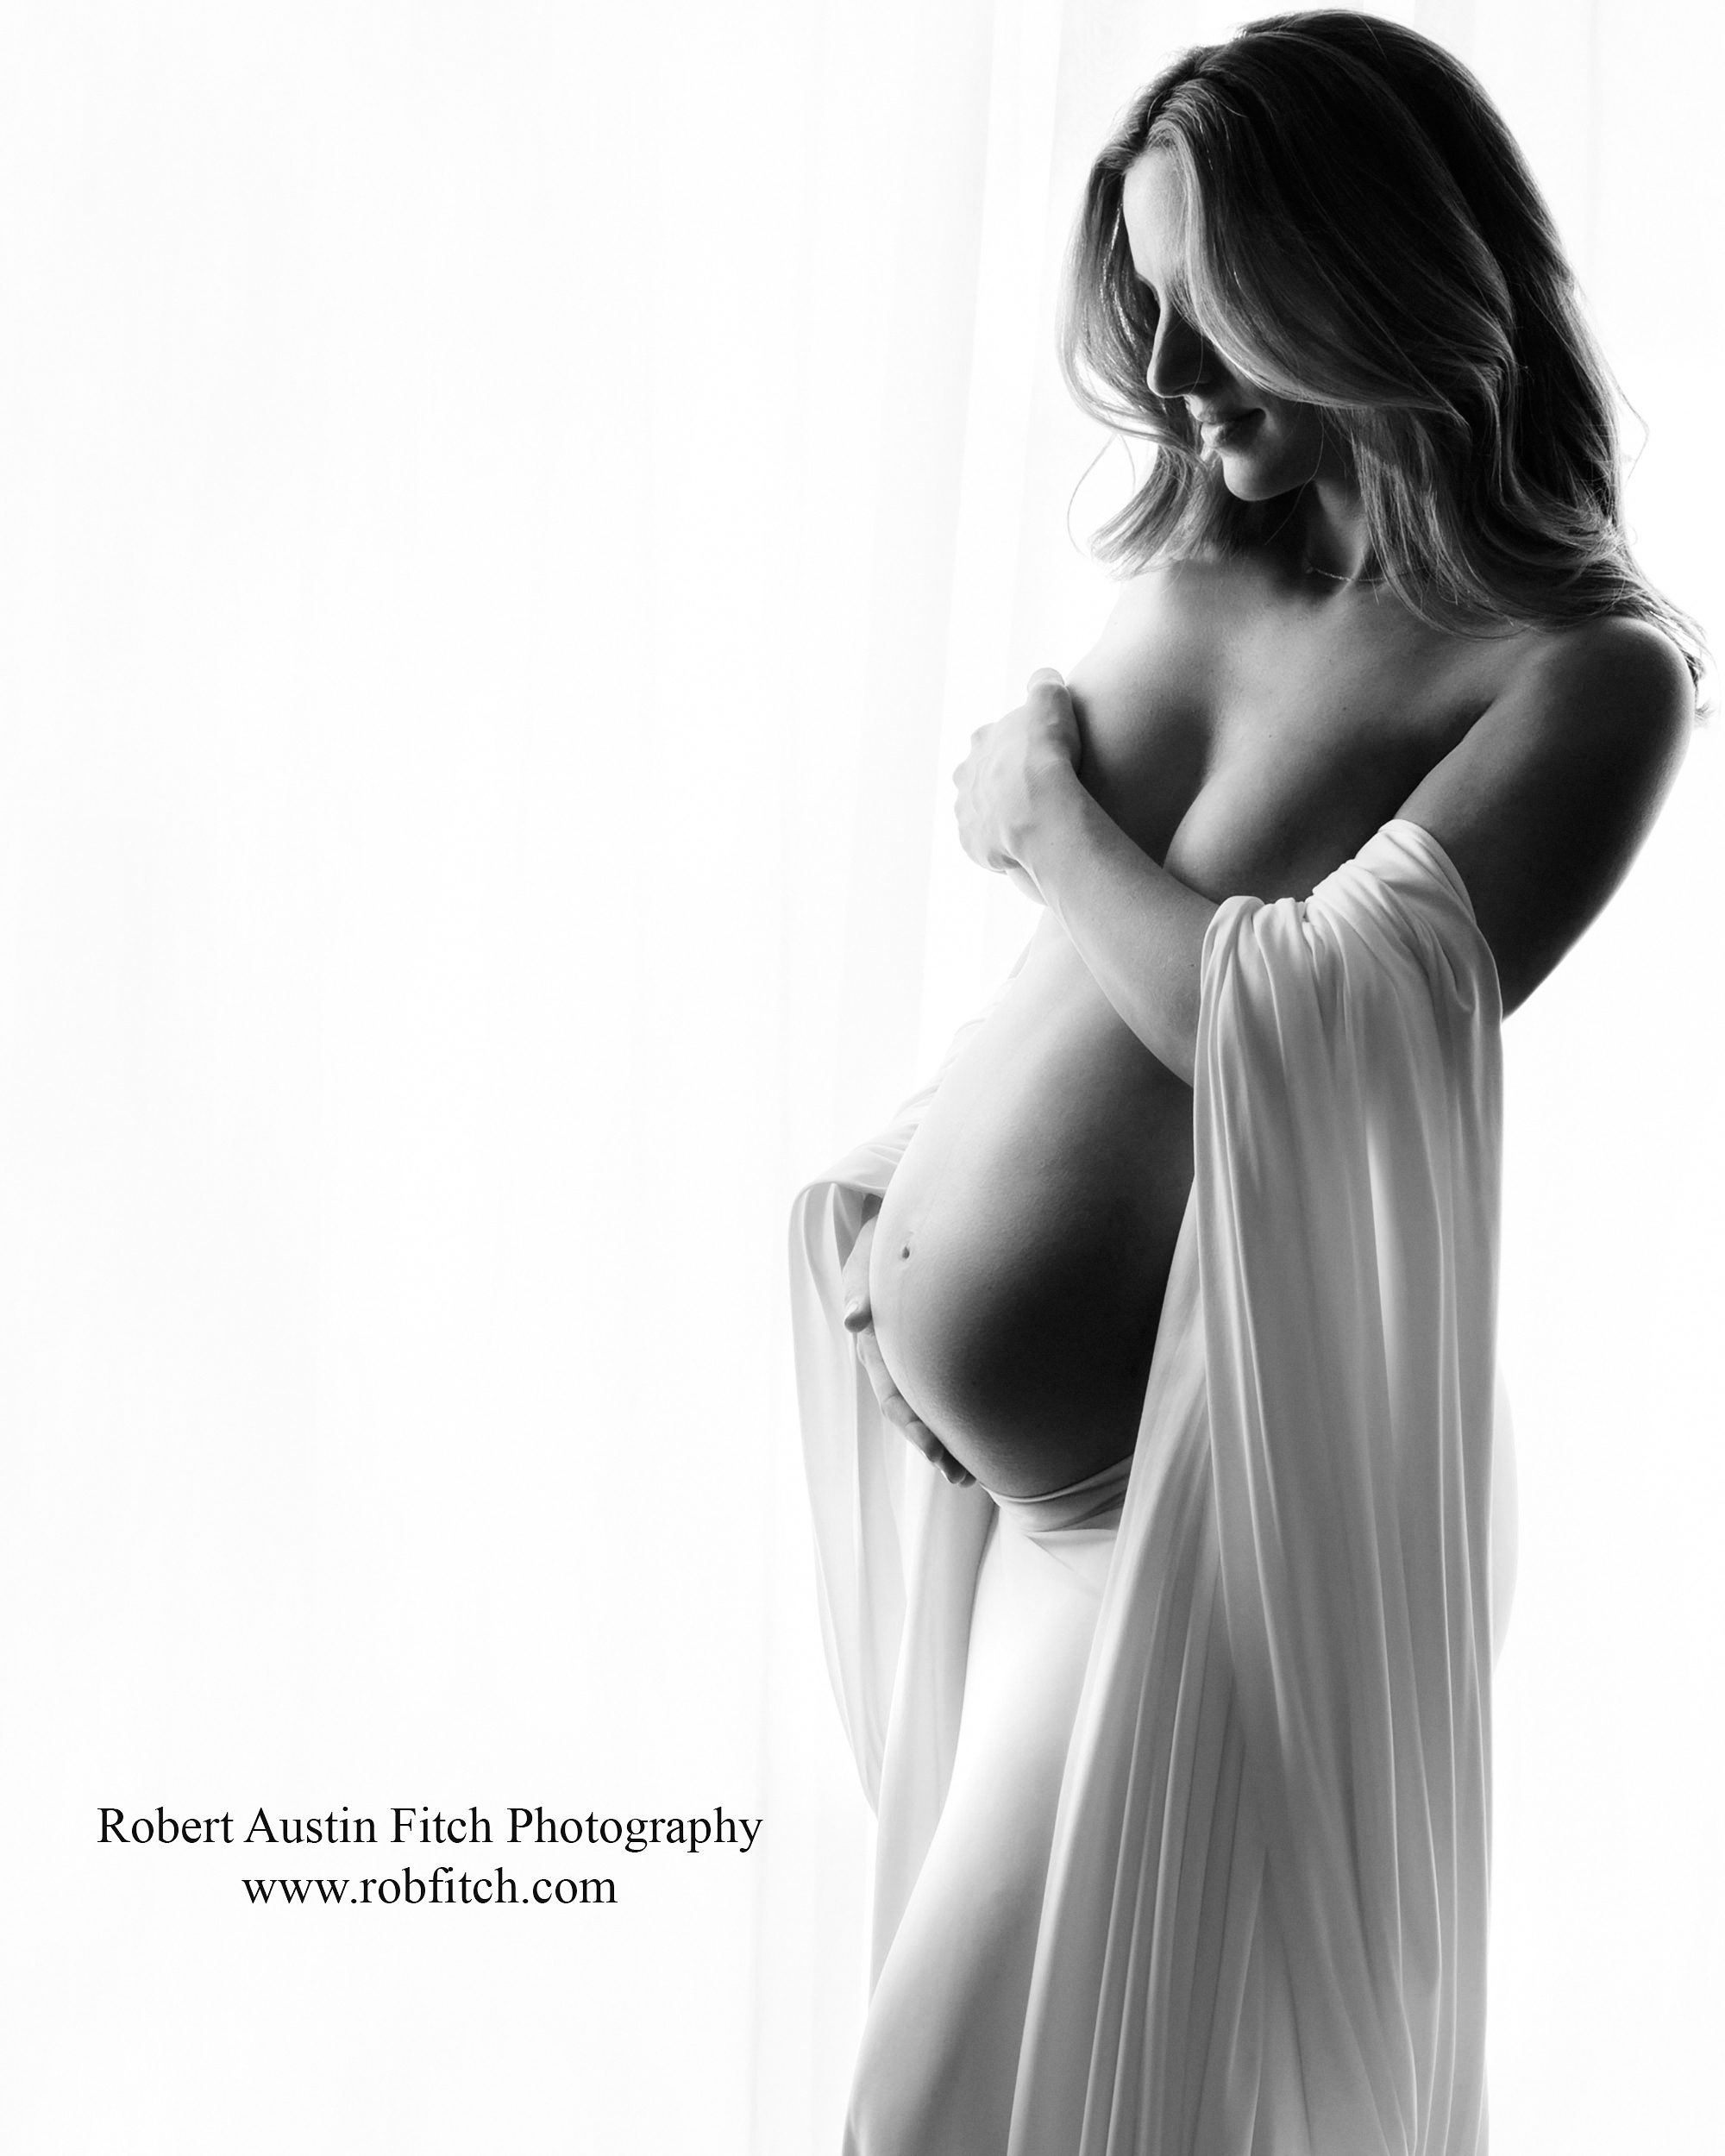 B&W Silhouette Maternity Photo with White Fabric Draping